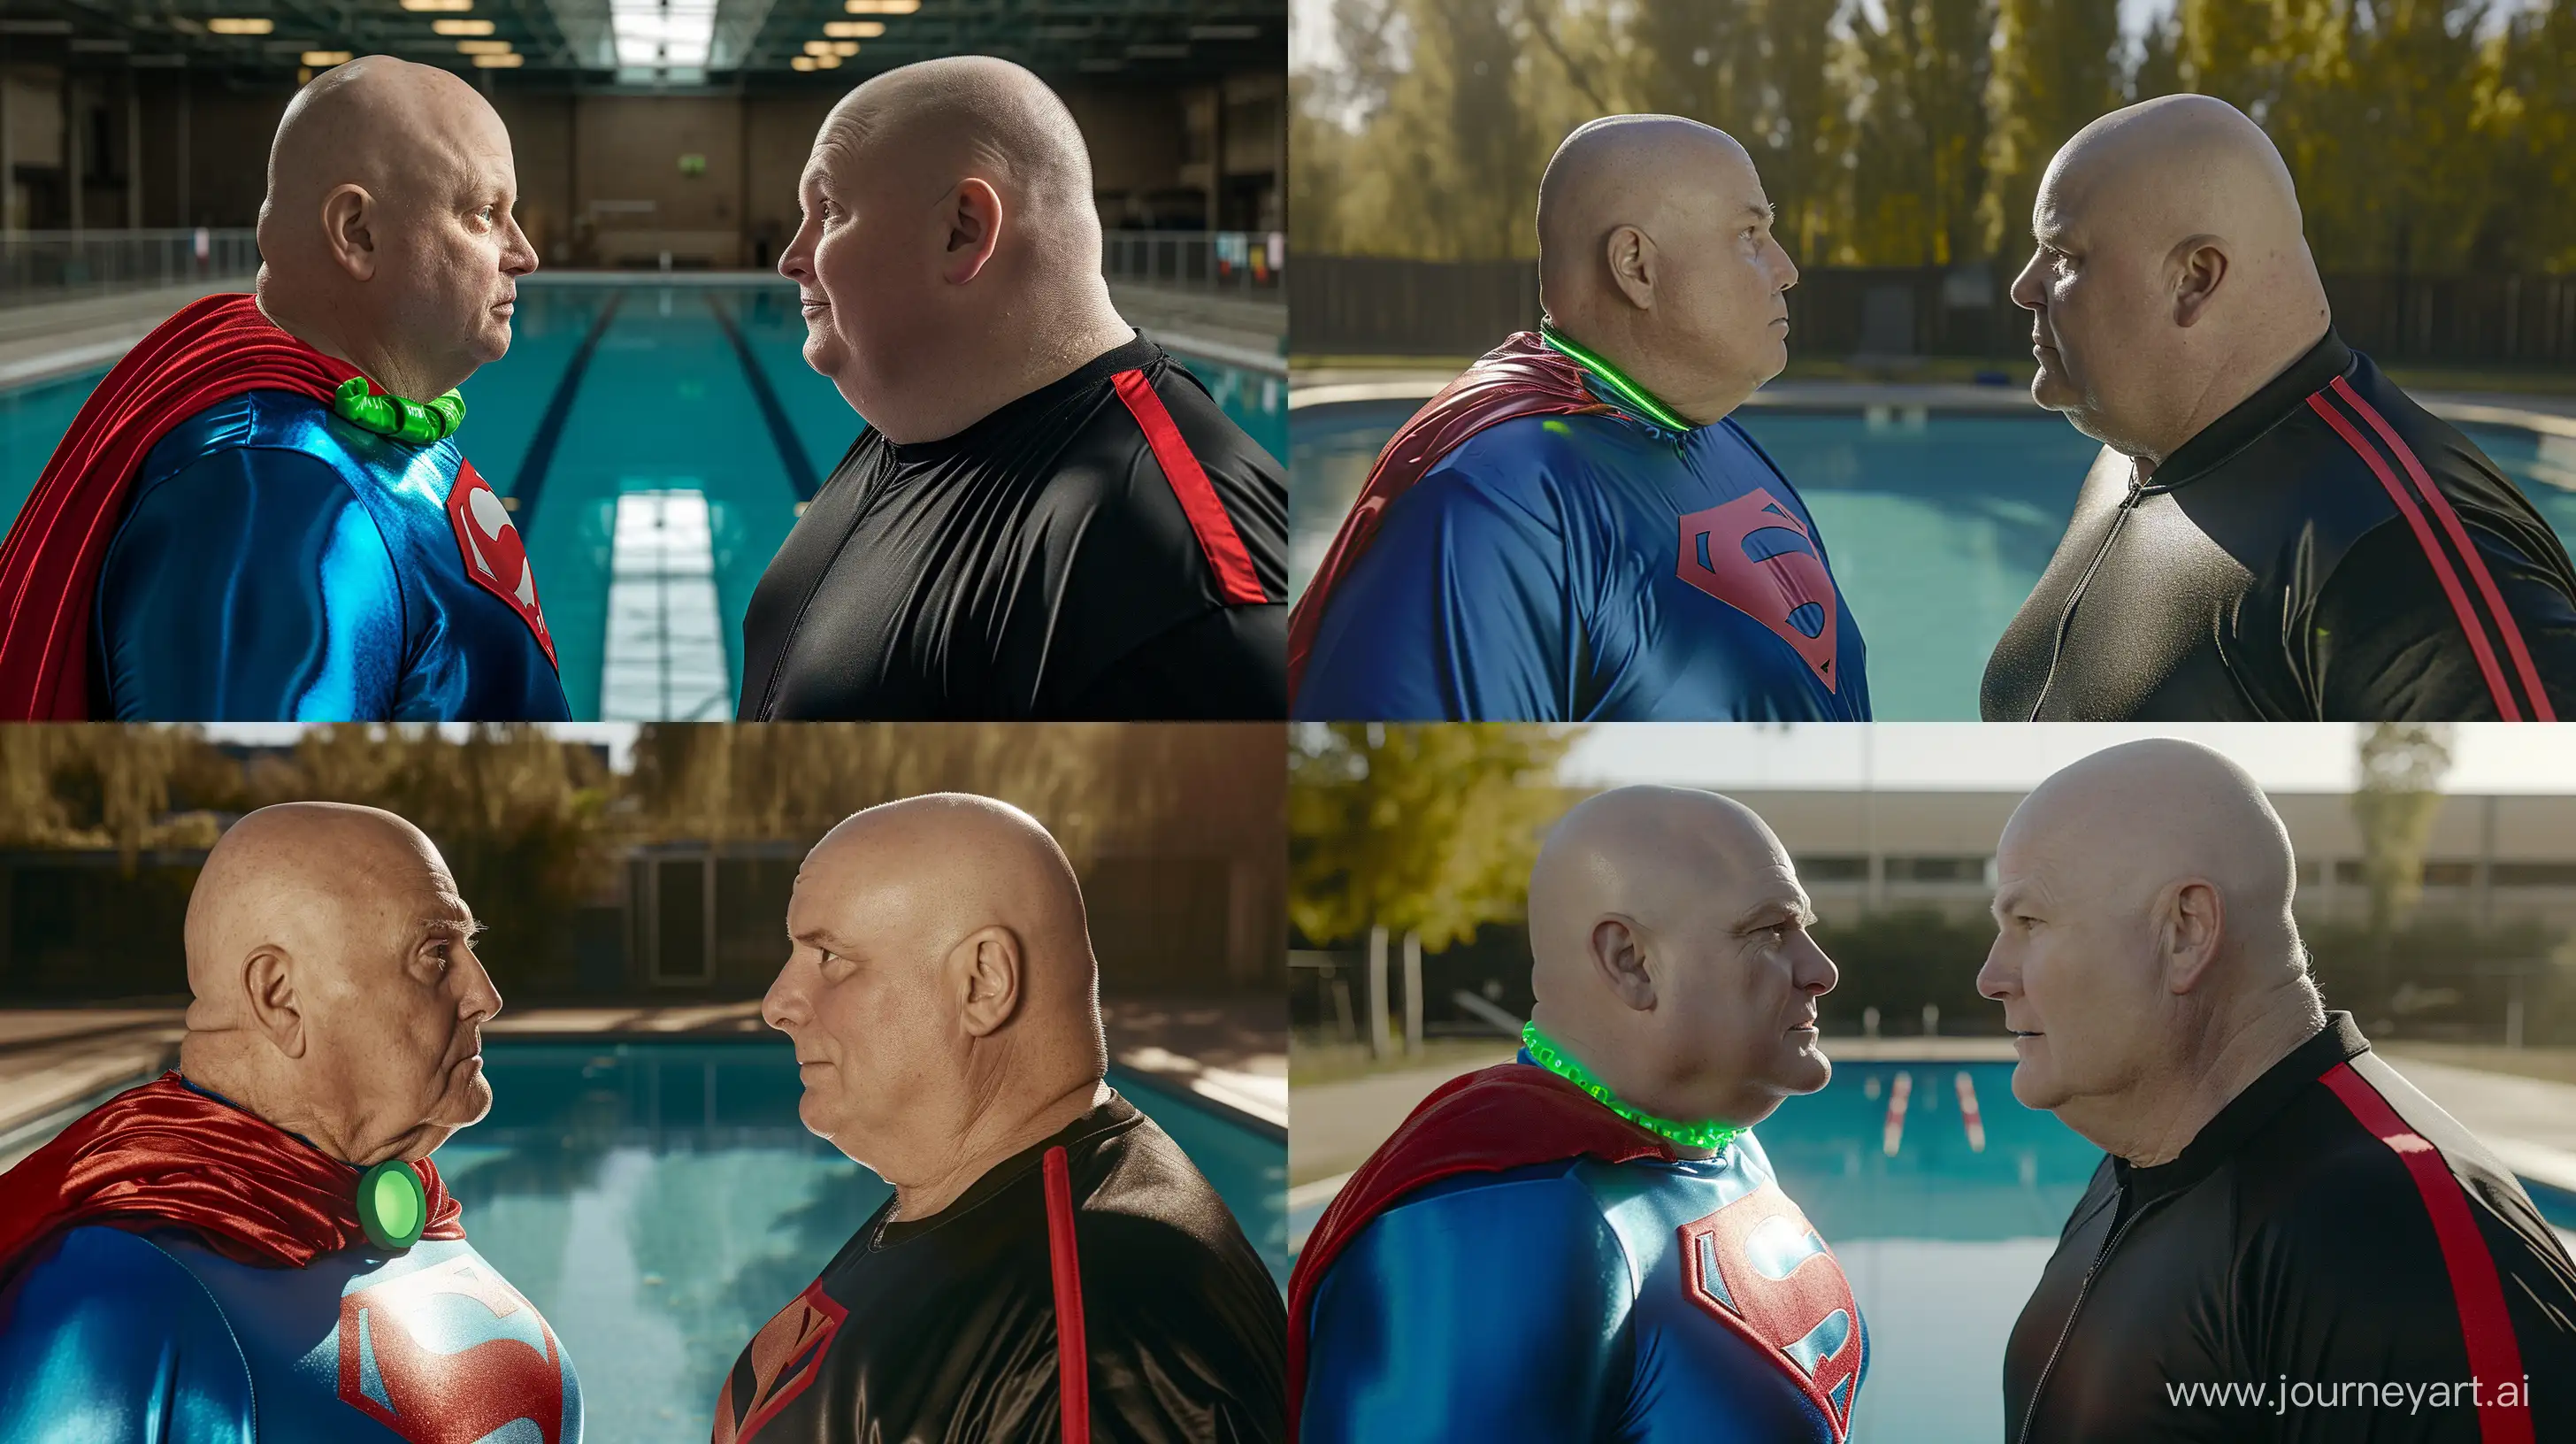 Chubby-Men-in-Unique-Outfits-Facing-Off-by-the-Pool